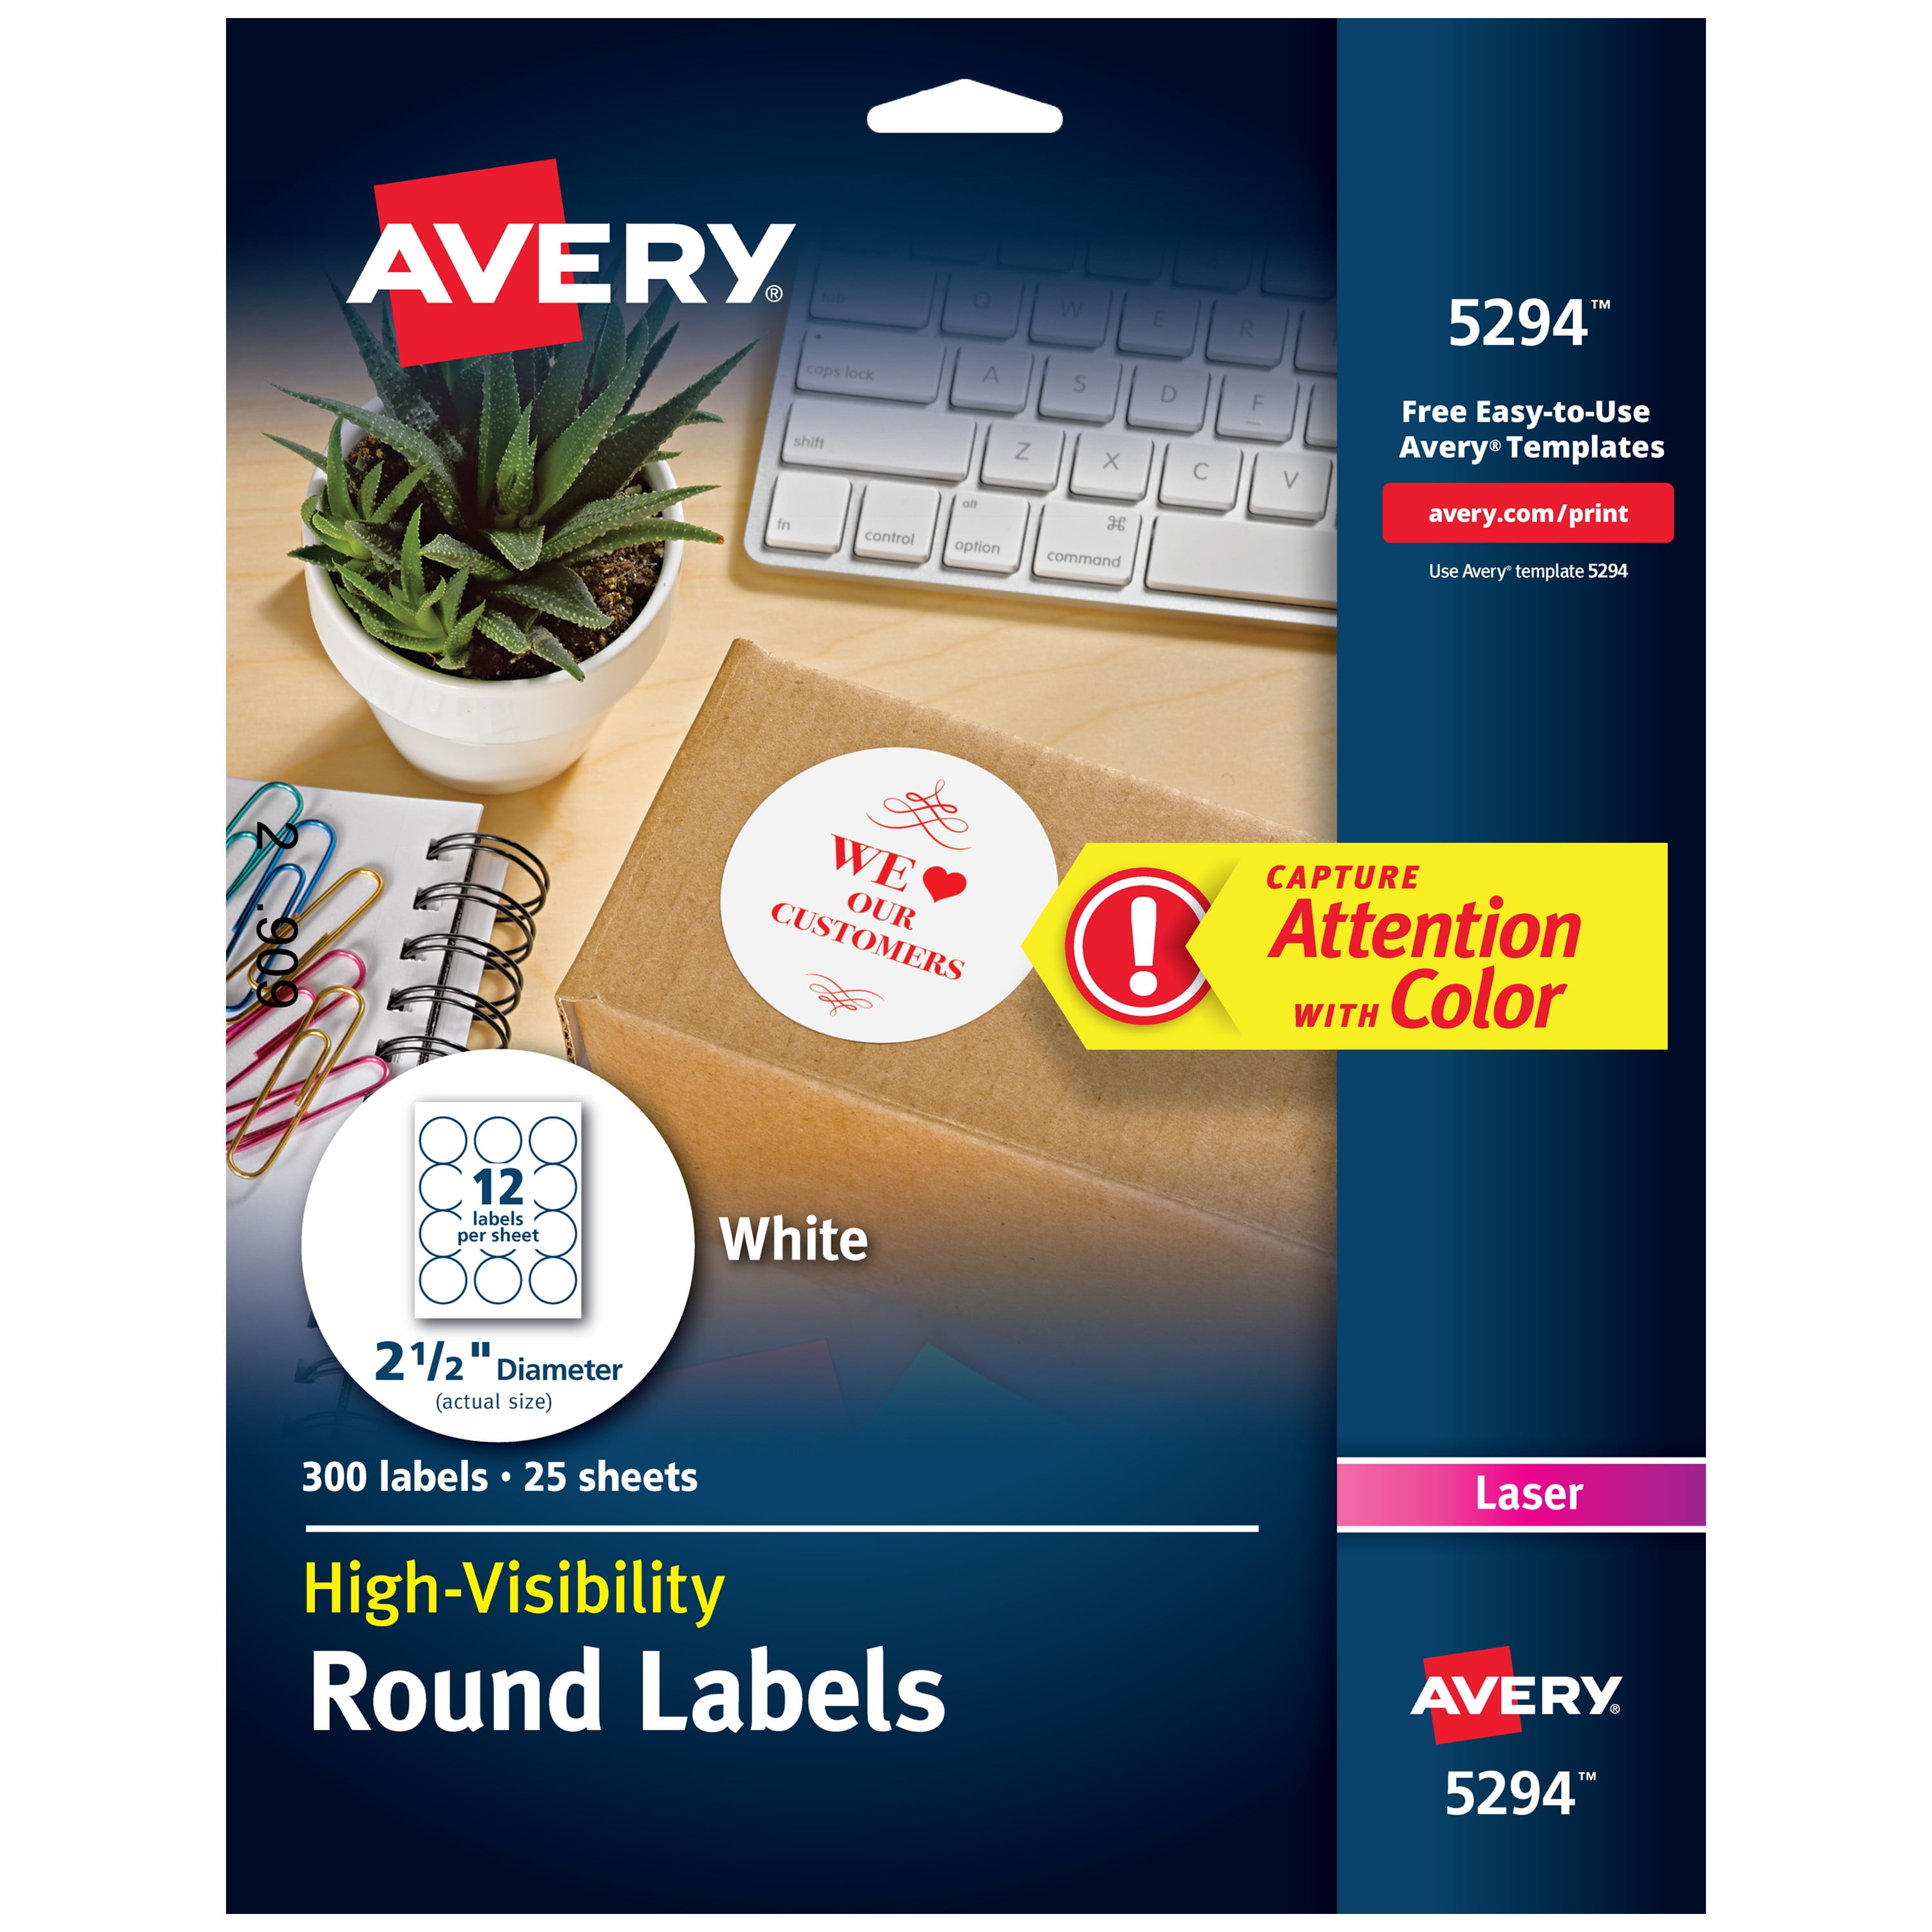 avery 5294 template